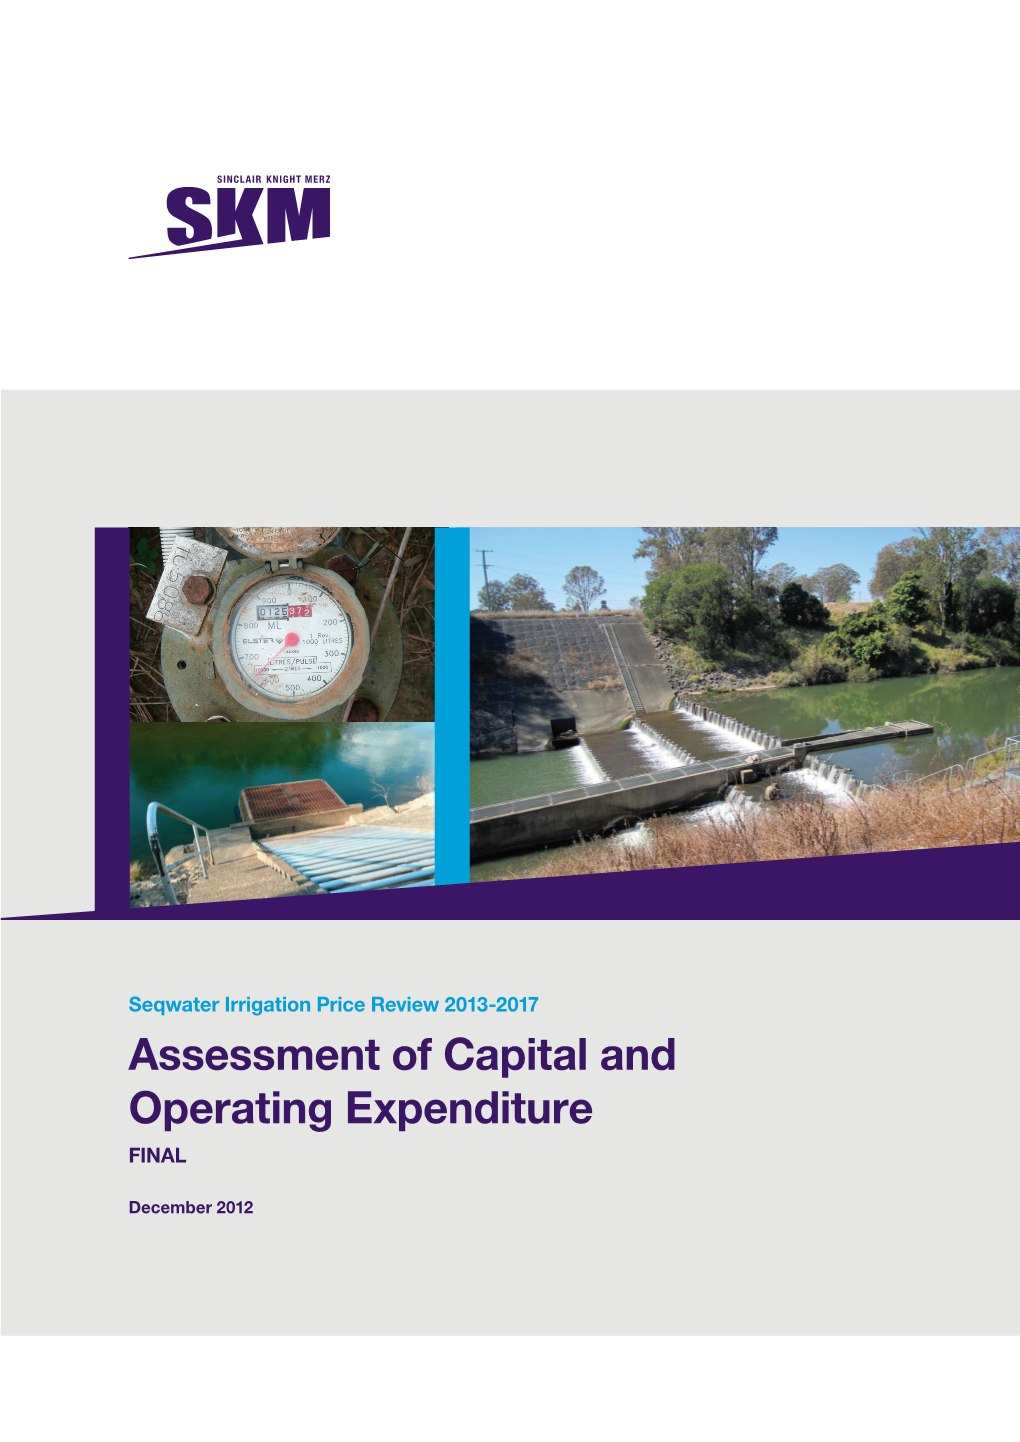 Assessment of Capital and Operating Expenditure Final